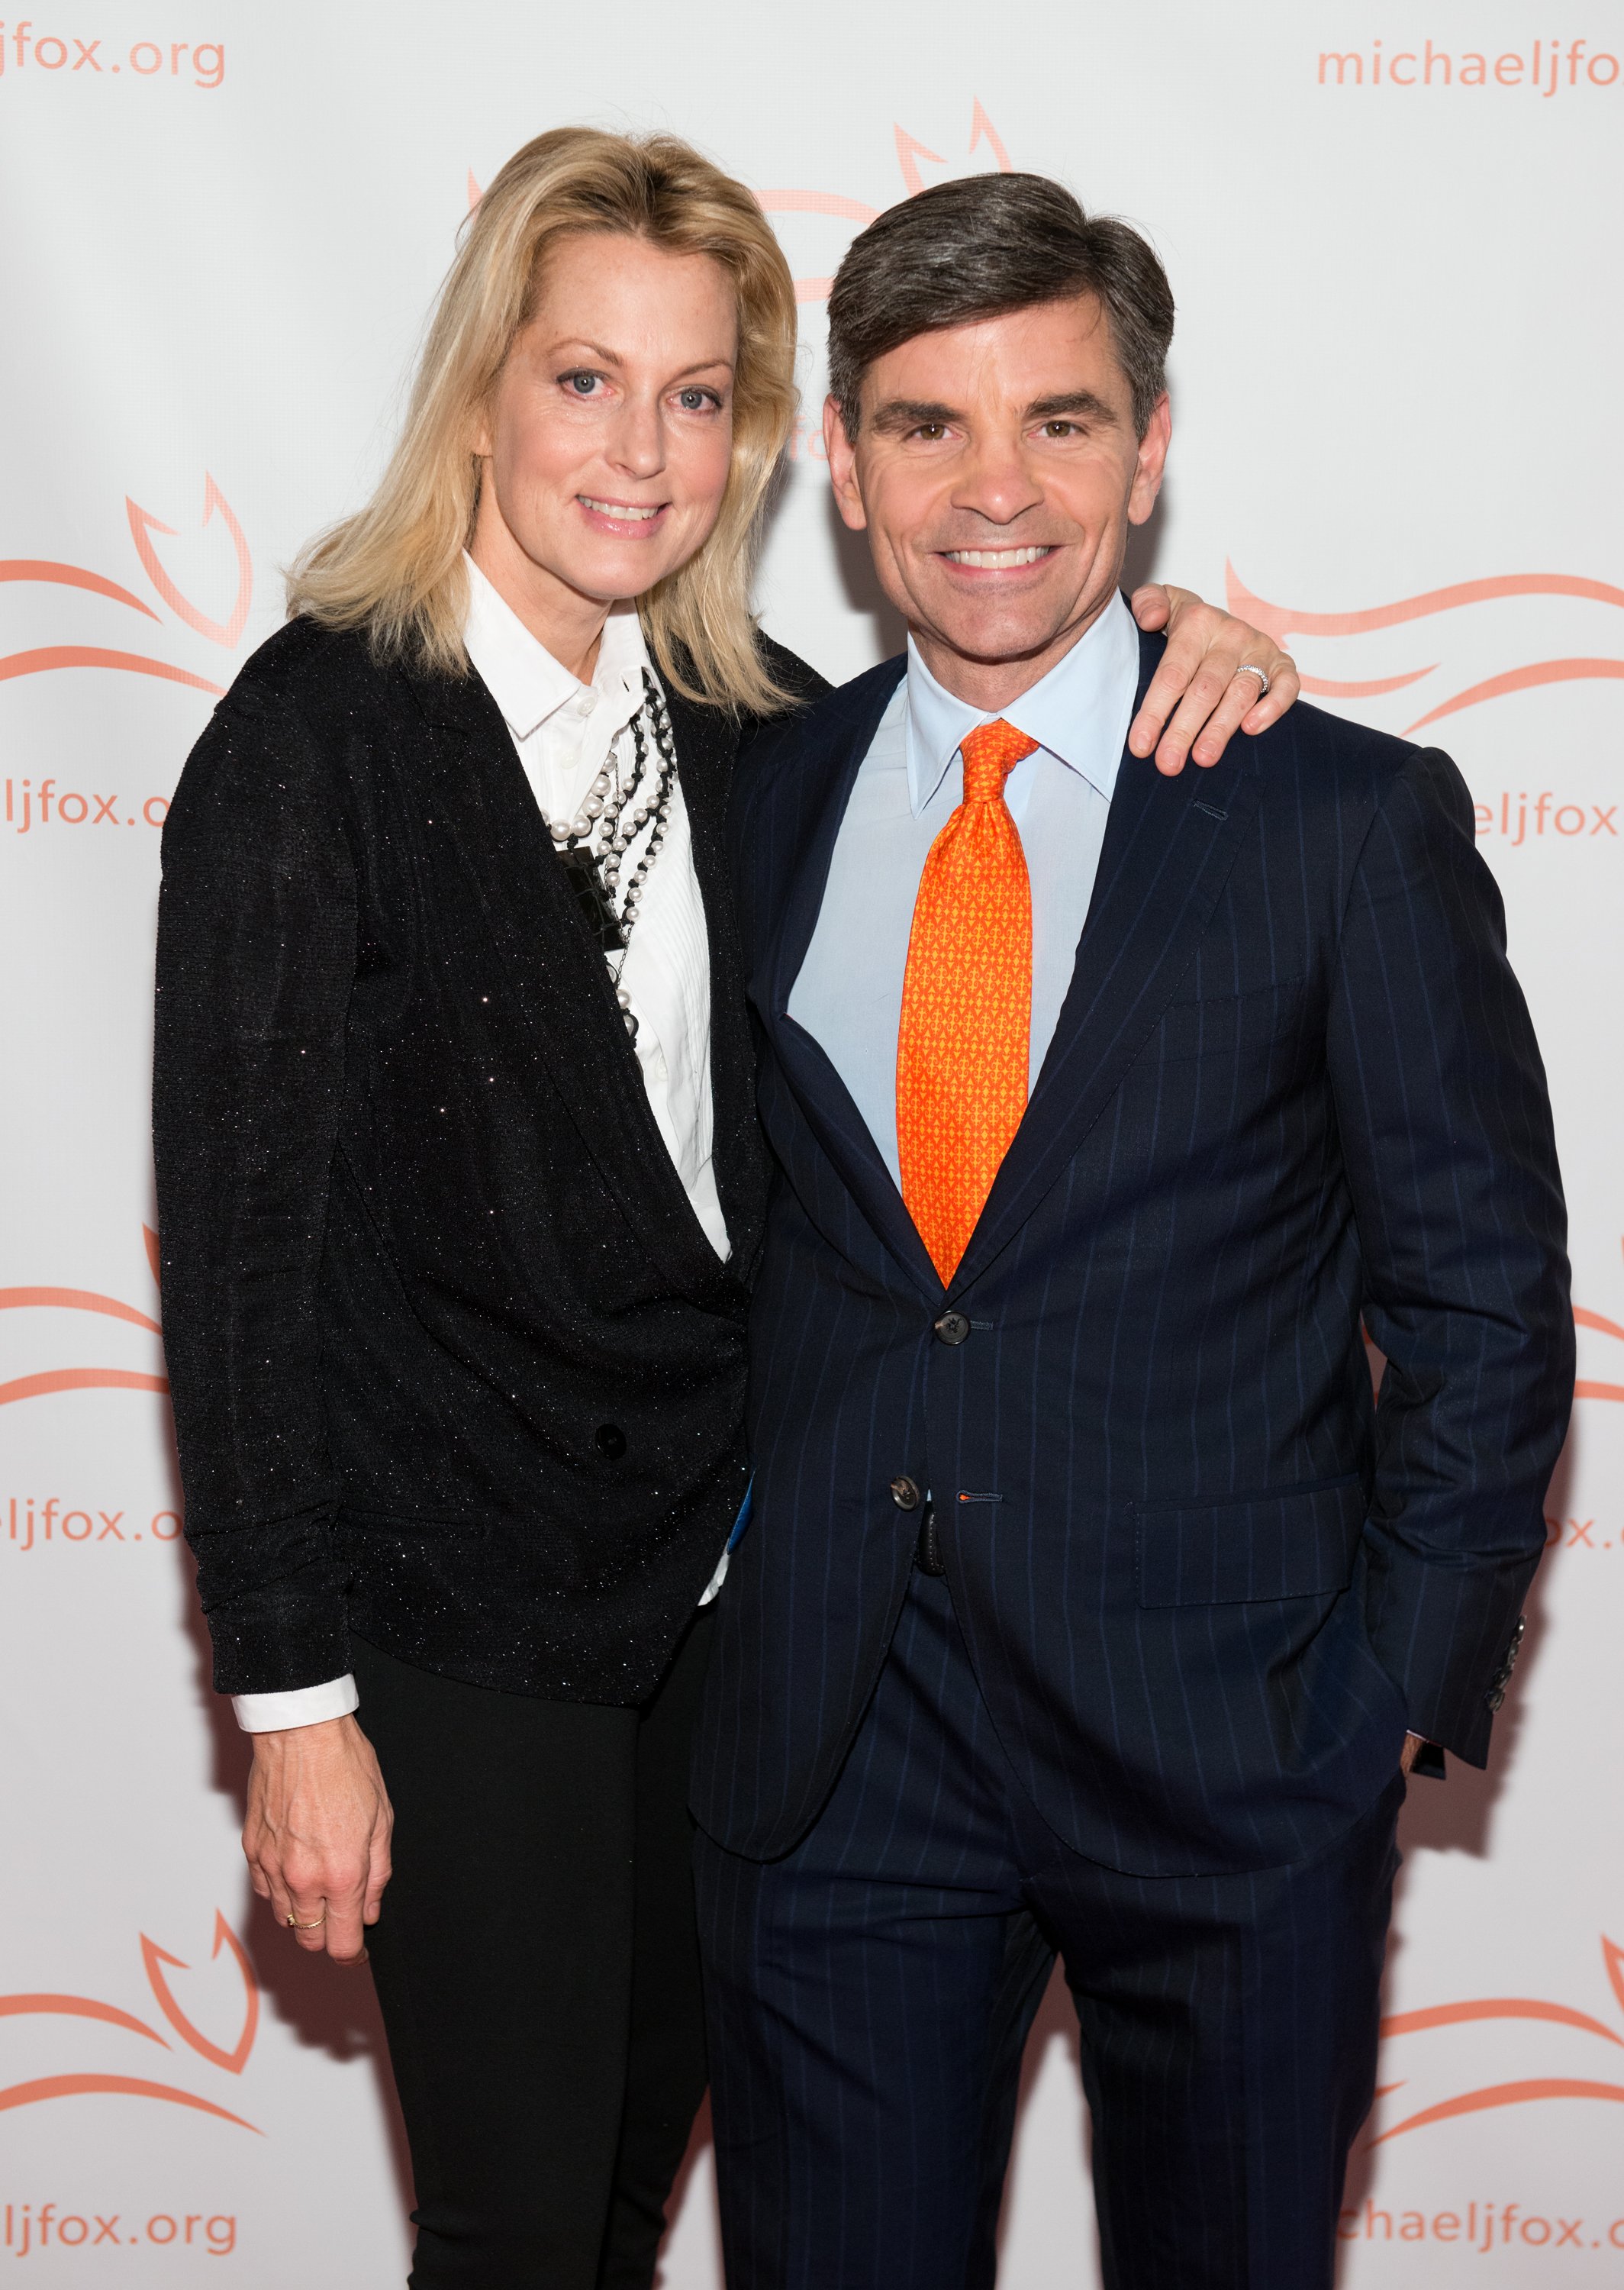 Ali Wentworth and George Stephanopoulos attend "A Funny Thing Happened On The Way To Cure Parkinson's" Gala on November 14, 2015, in New York City. | Source: Getty Images.